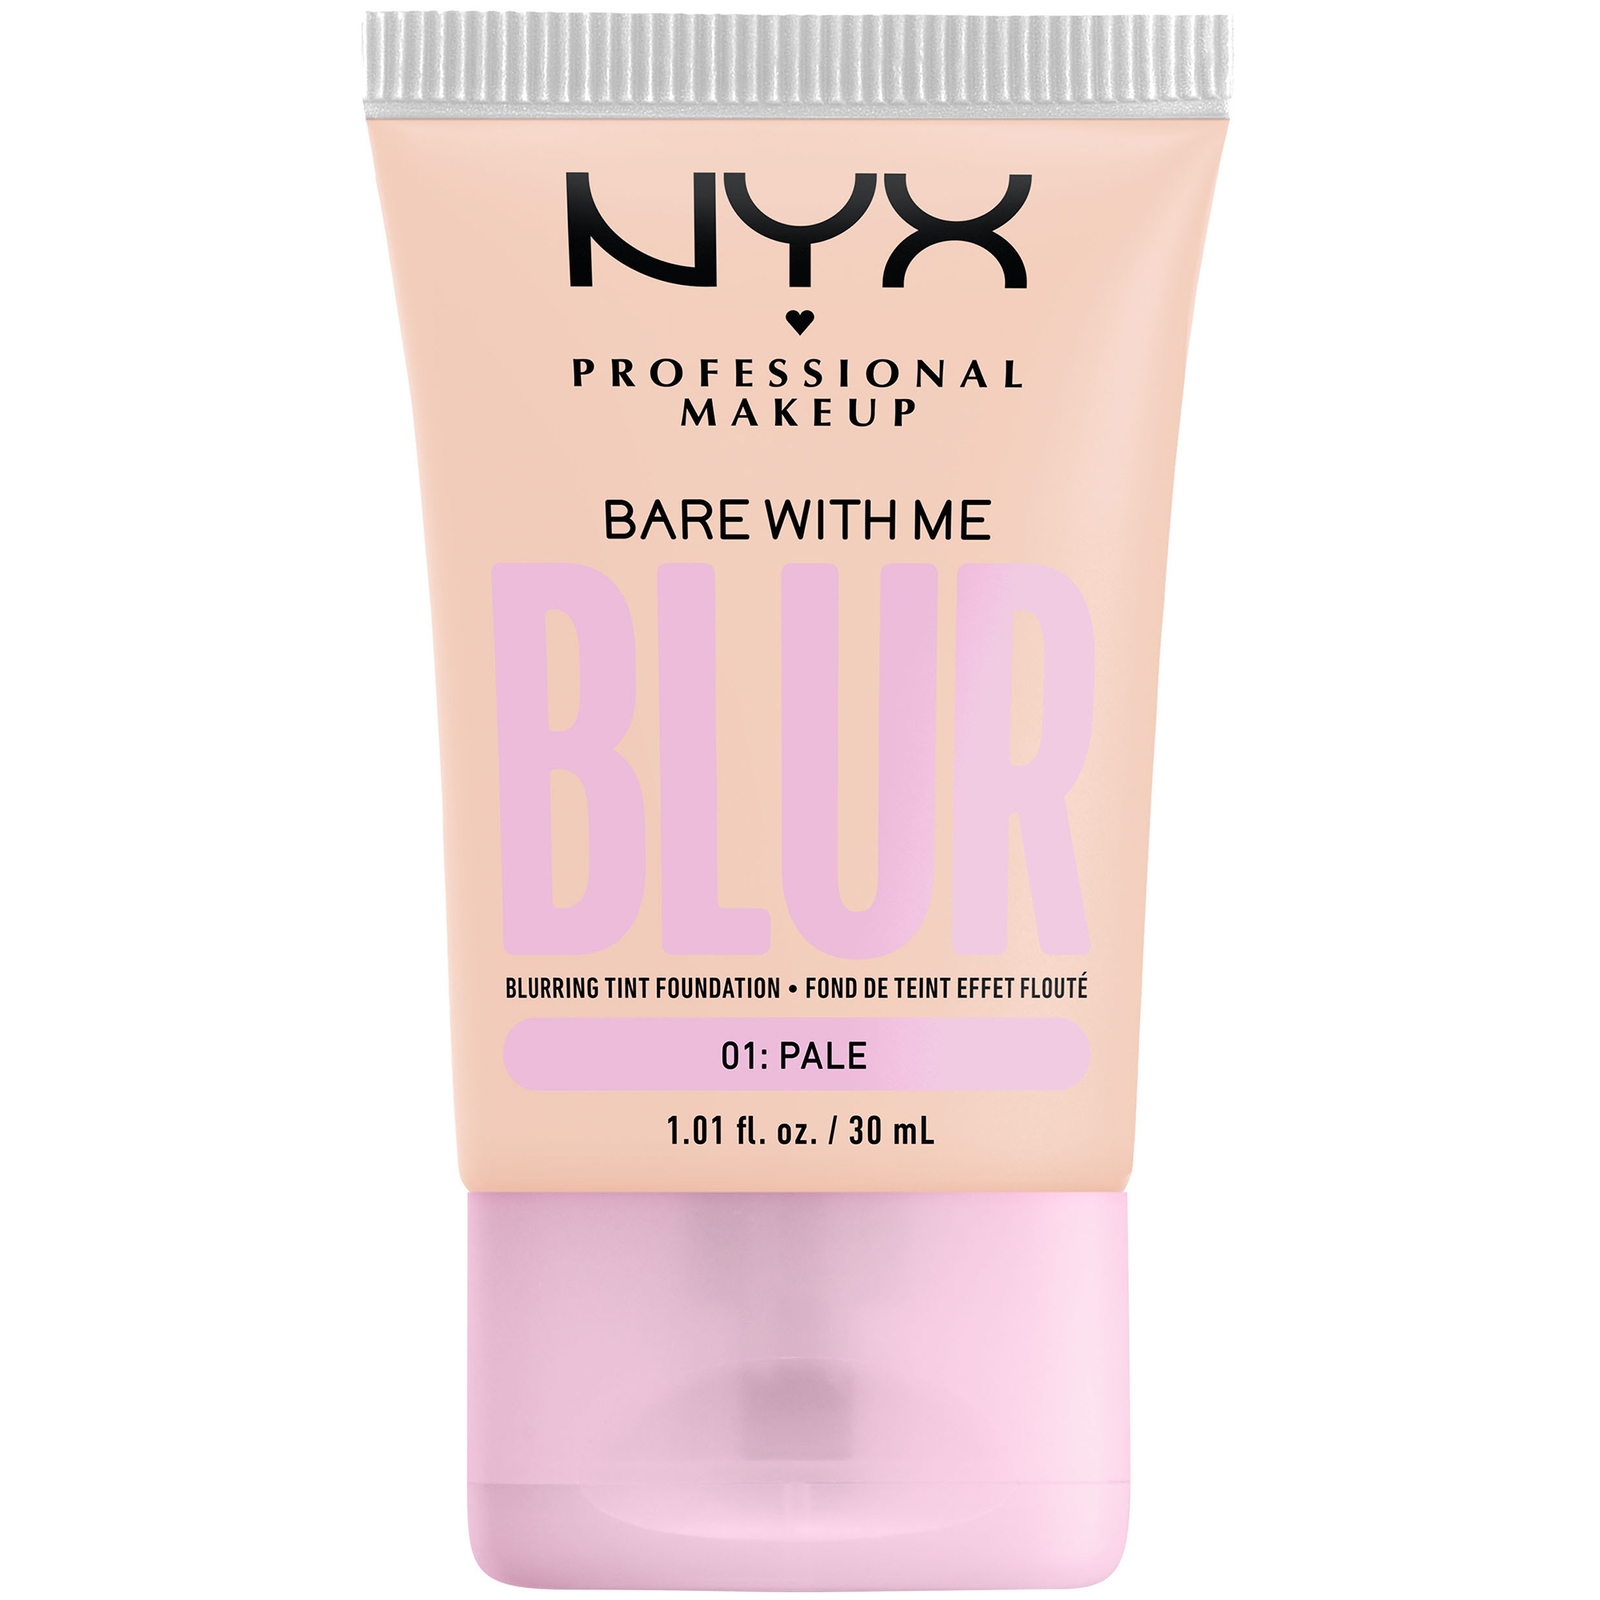 Nyx Professional Makeup Bare With Me Blur Tint Foundation 30ml (varios Shades) - Pale In White